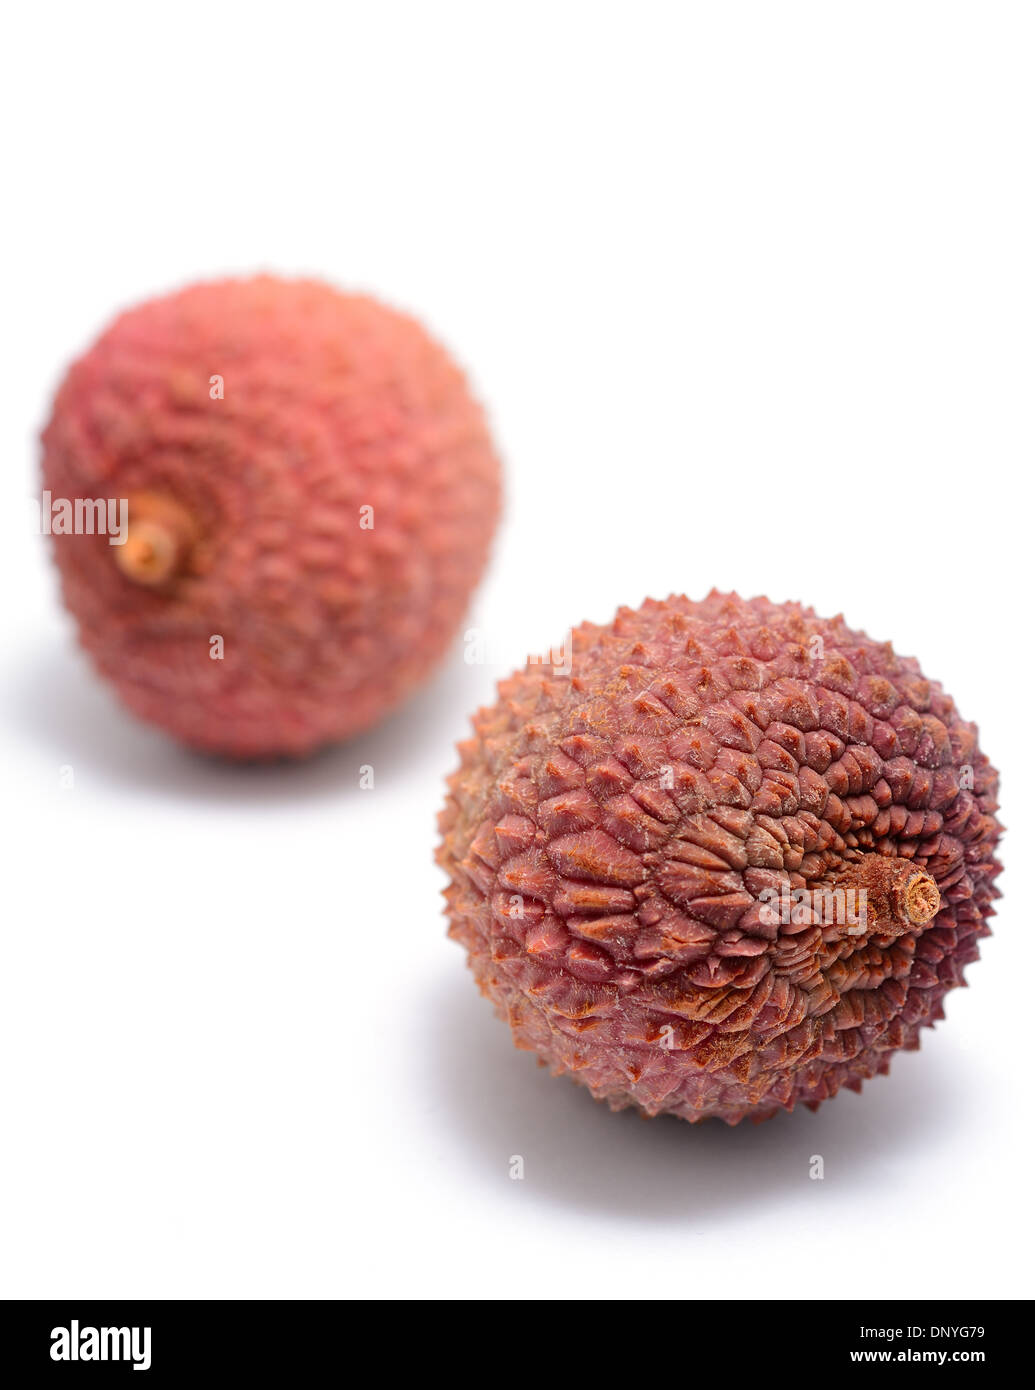 Litchi (Litchi chinensis) placed on the white background. Stock Photo